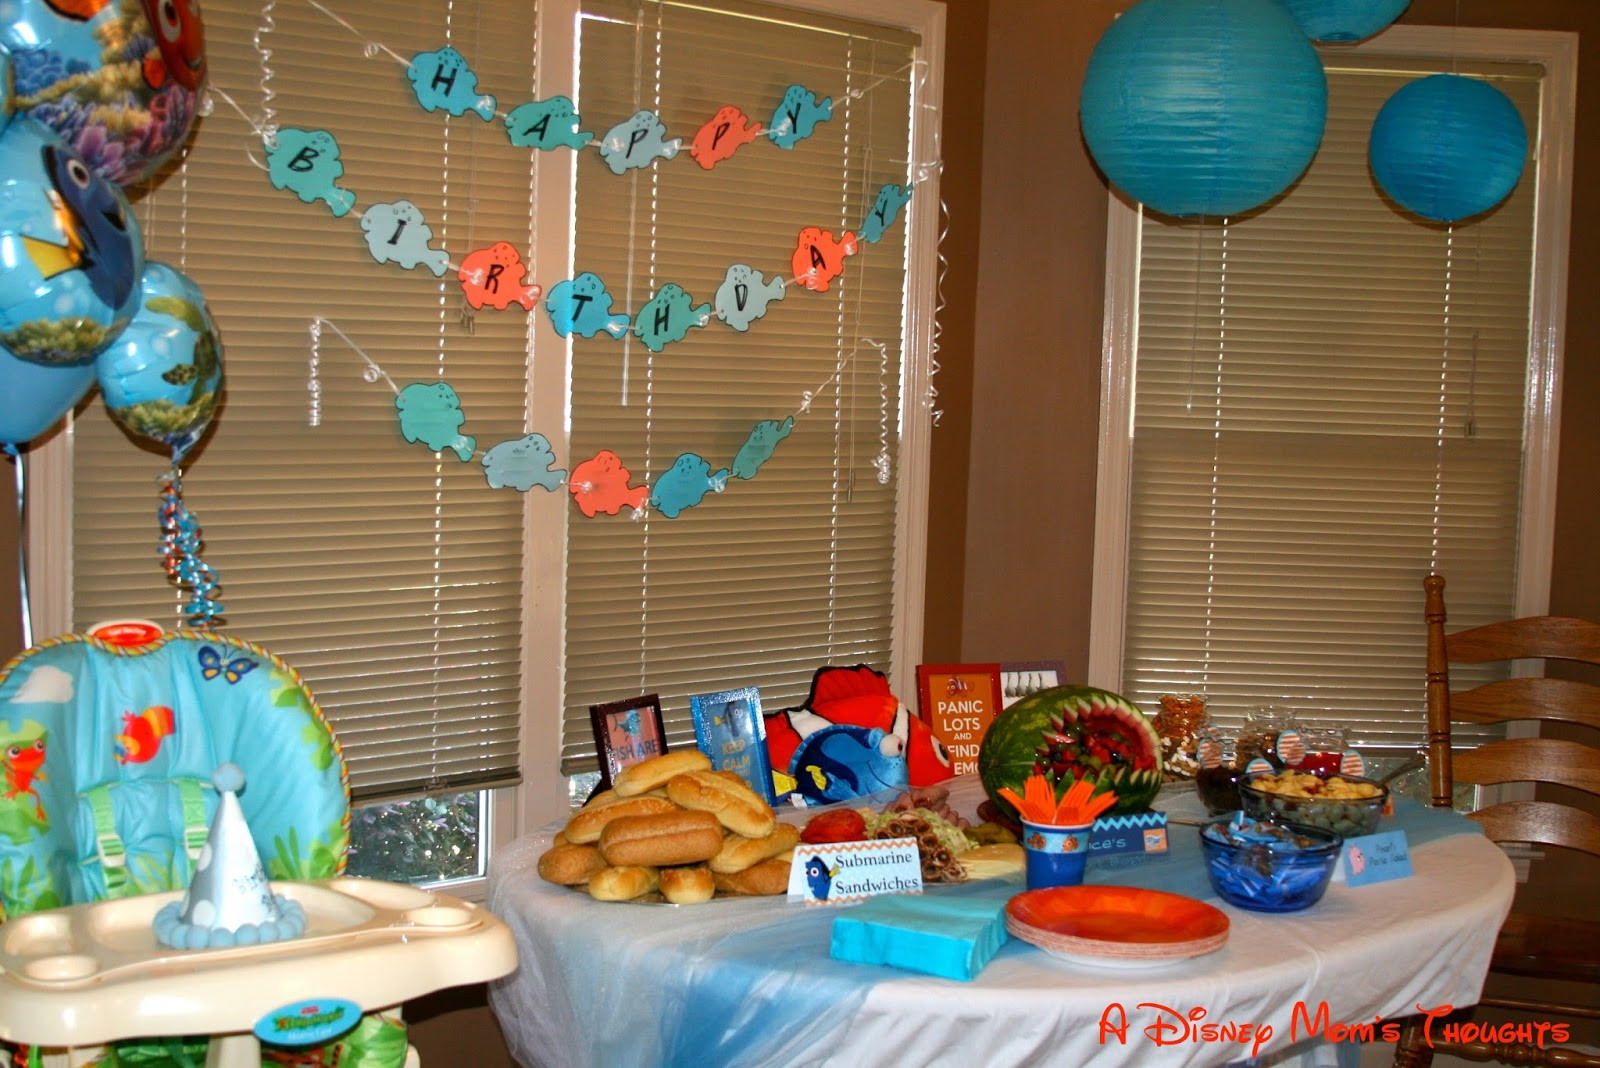 Nemo Birthday Decorations
 A Disney Mom s Thoughts Finding Nemo First Birthday